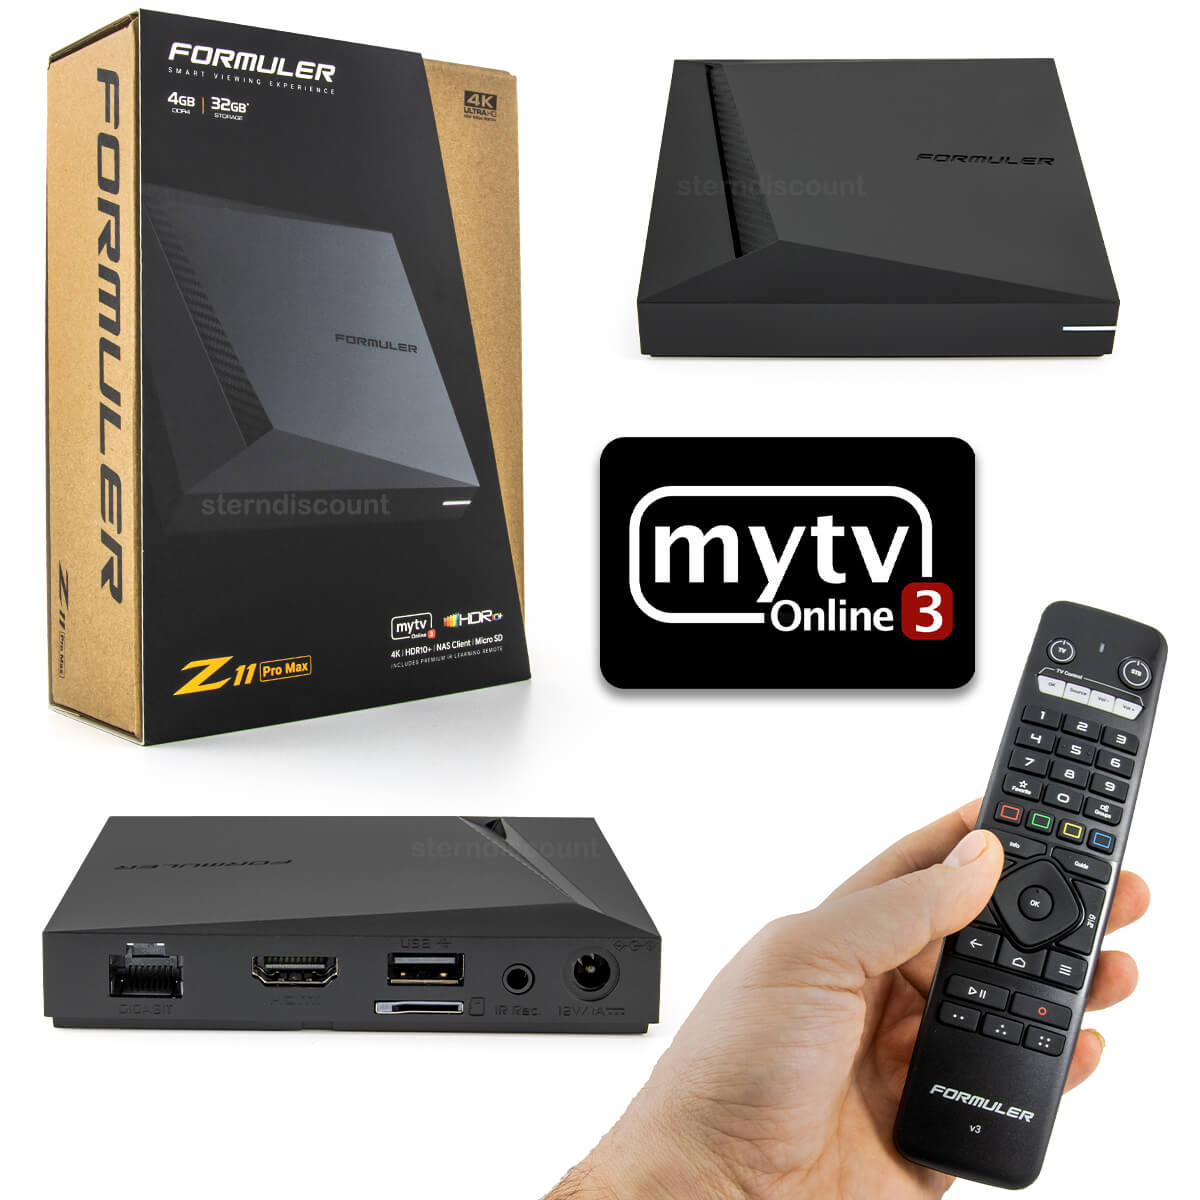 Formuler Z11 Pro MAX smart tv android box